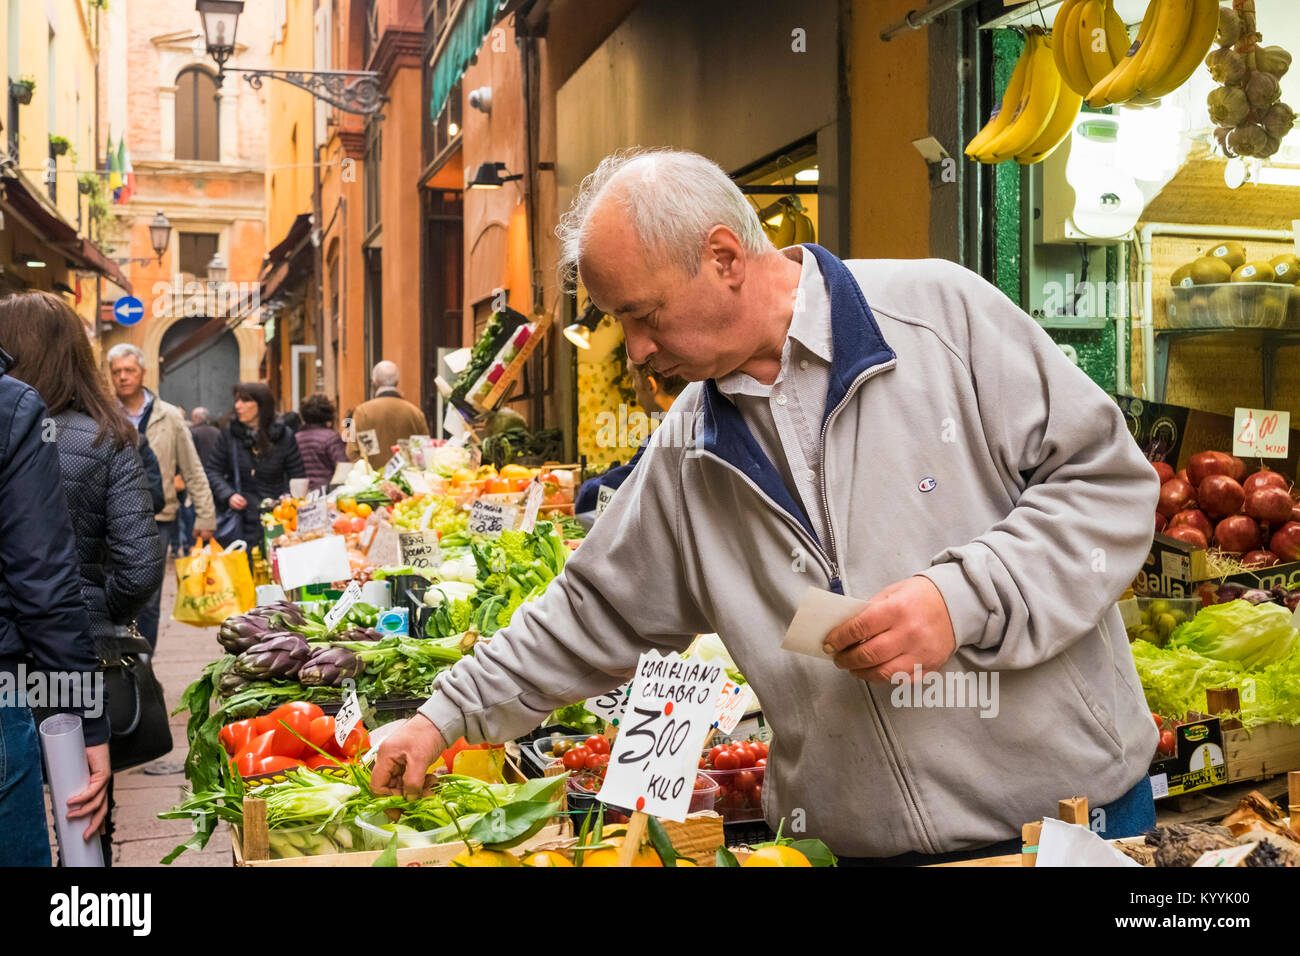 Bologna, Italy - fruit and vegetable market stall in the old town in Bologna city, Italy Stock Photo